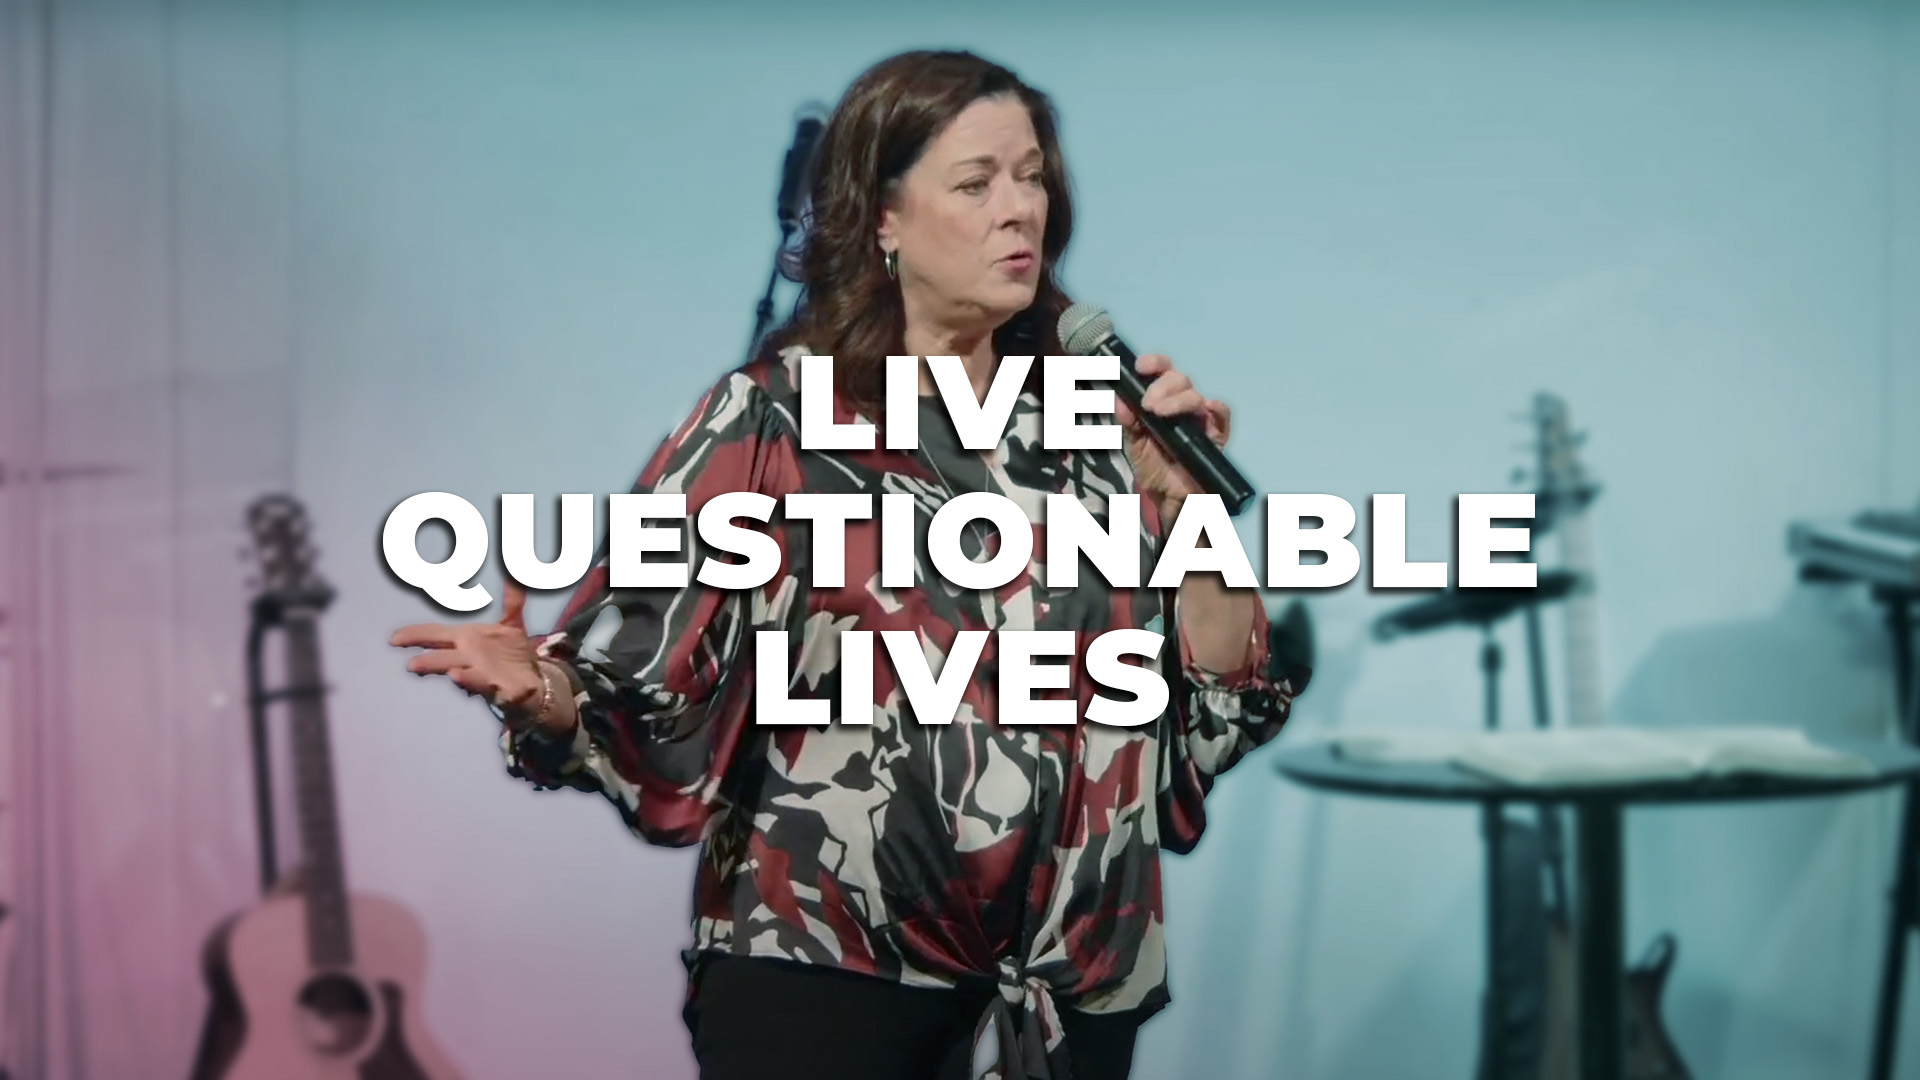 Live A Questionable Life - Cindy Booth